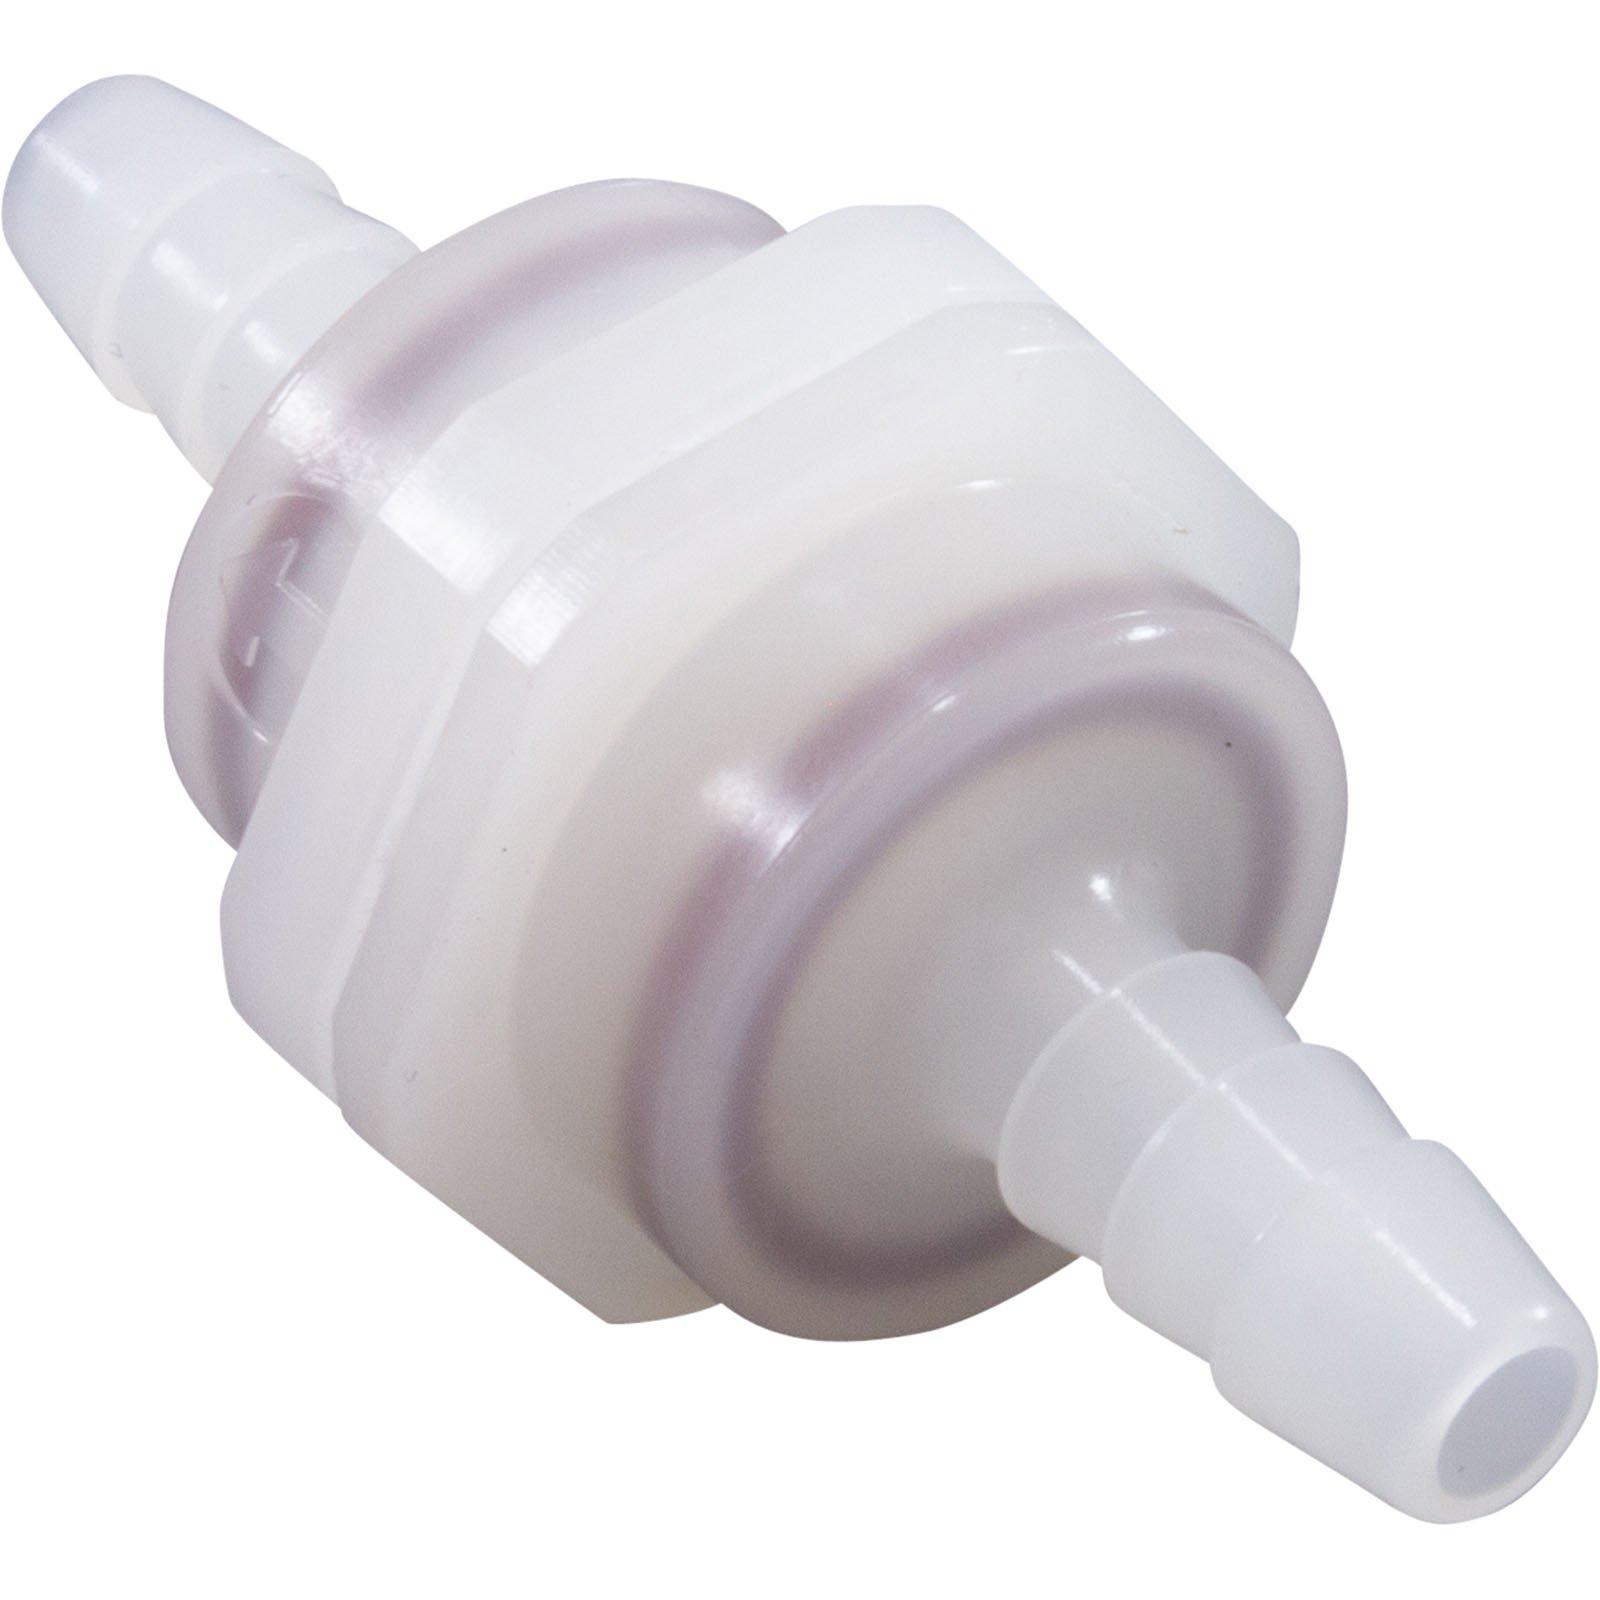 Supply Check Valve, Grn/wht, Fits 1/4 And 3/8in Hose